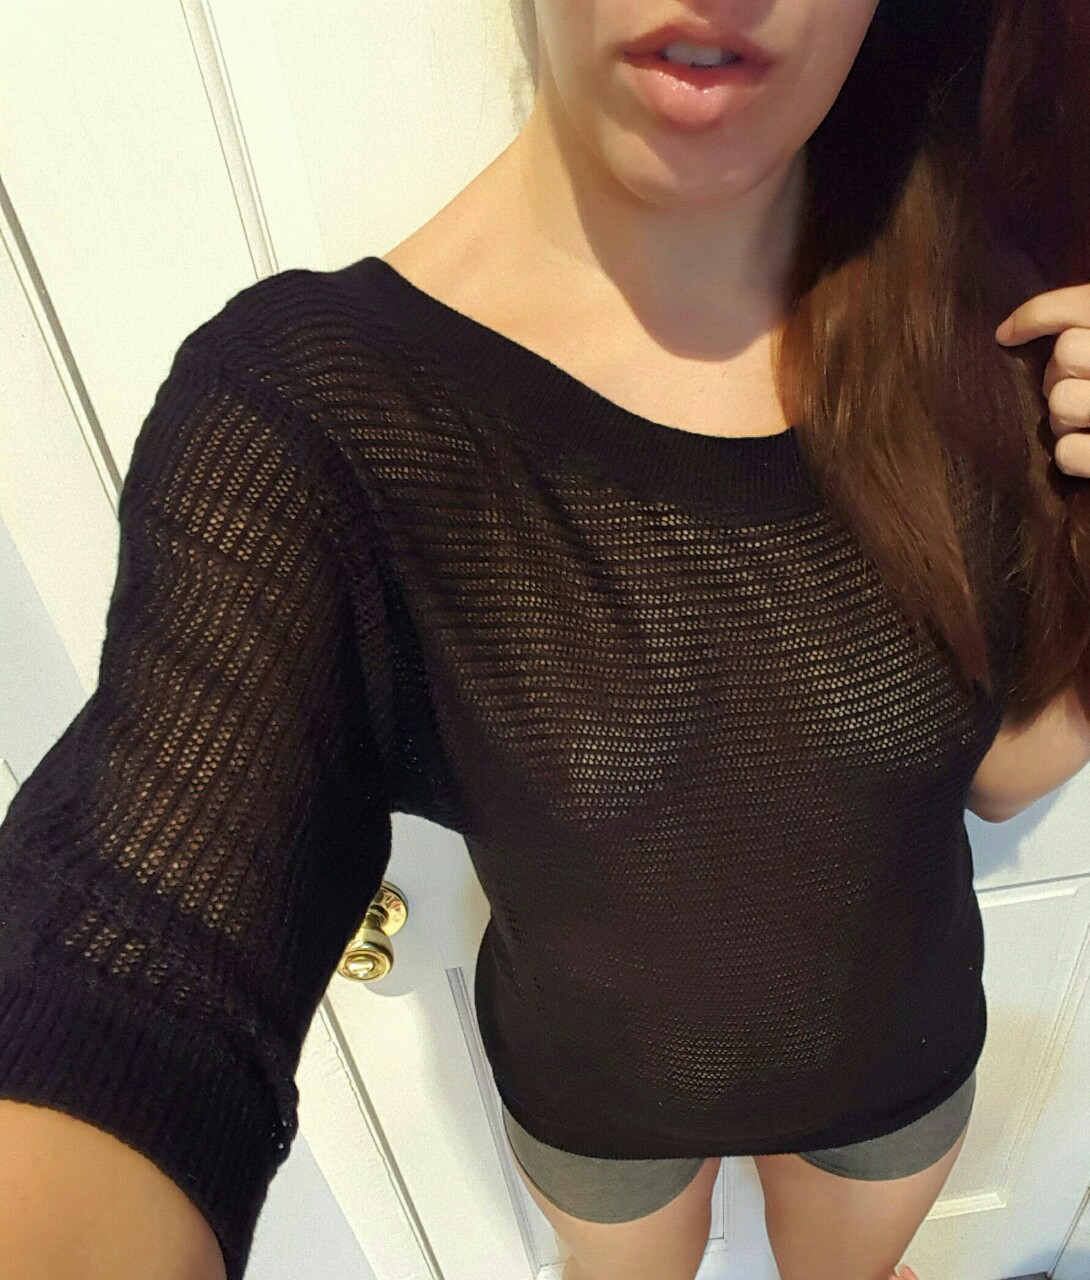 macmilf4:  soccer-mom-marie:  Do think I could this off while shopping? Well, even